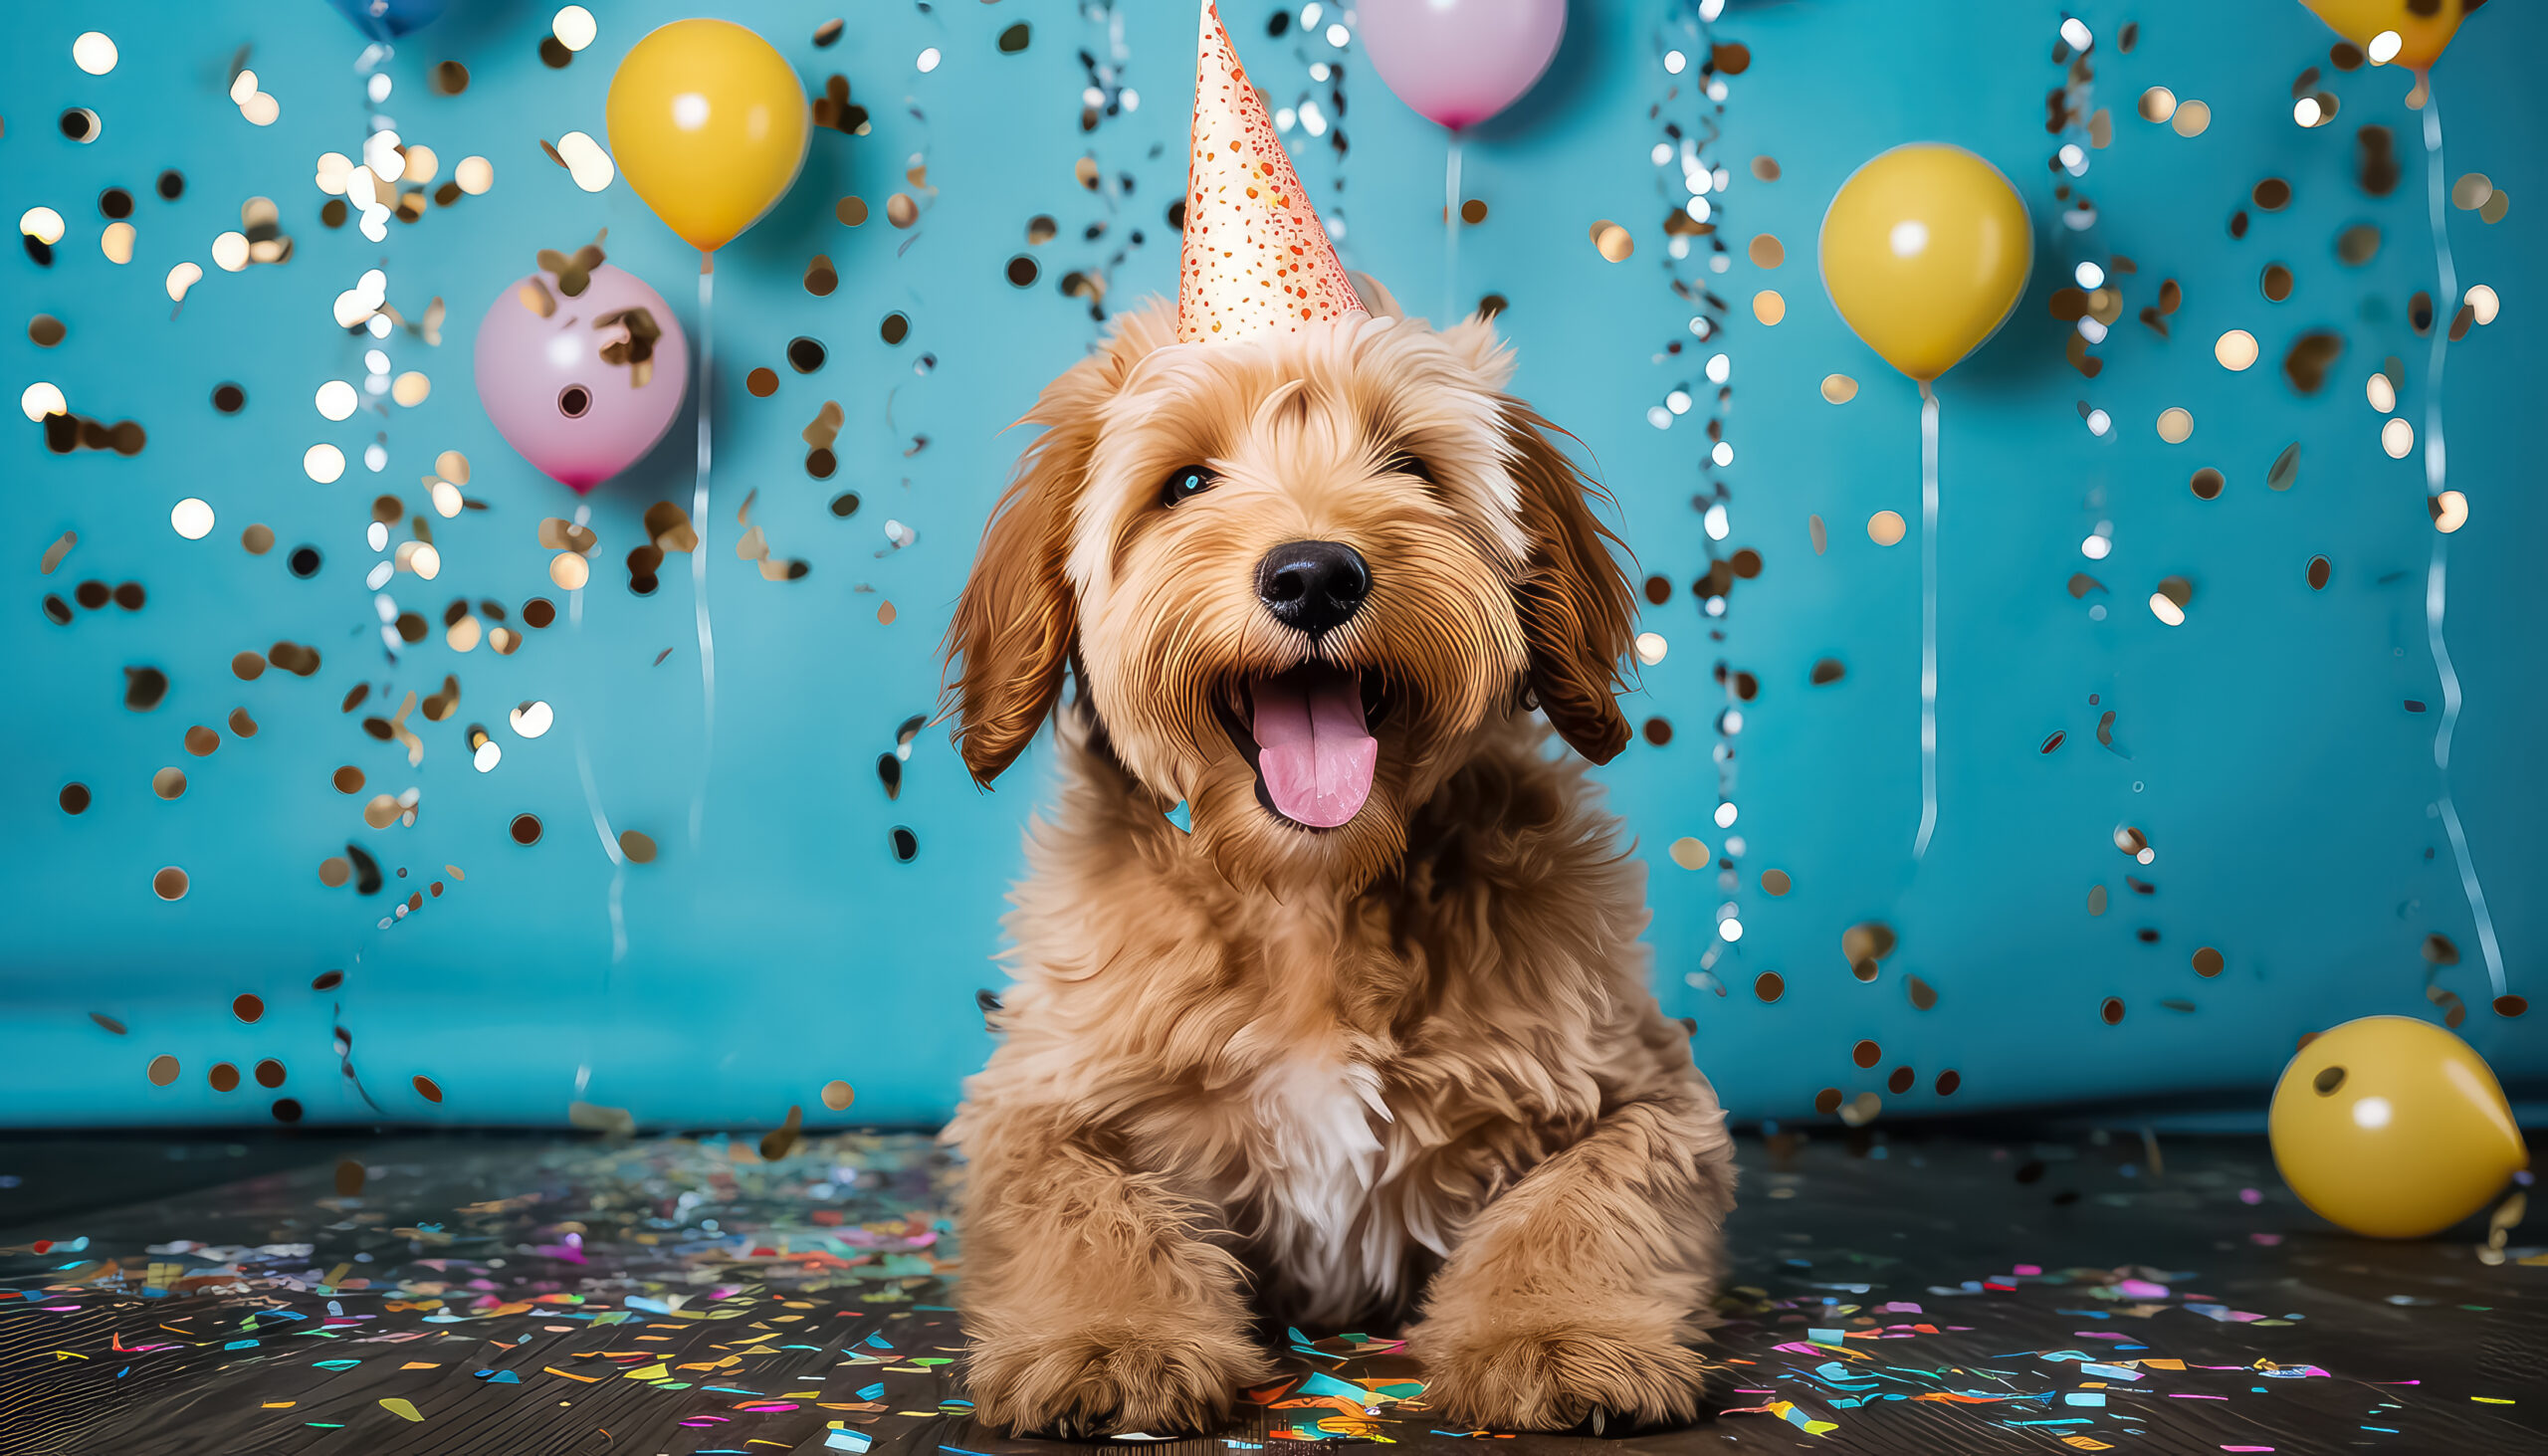 Golden doodle puppy enjoying a happy birthday with party hat, balloons and confetti.